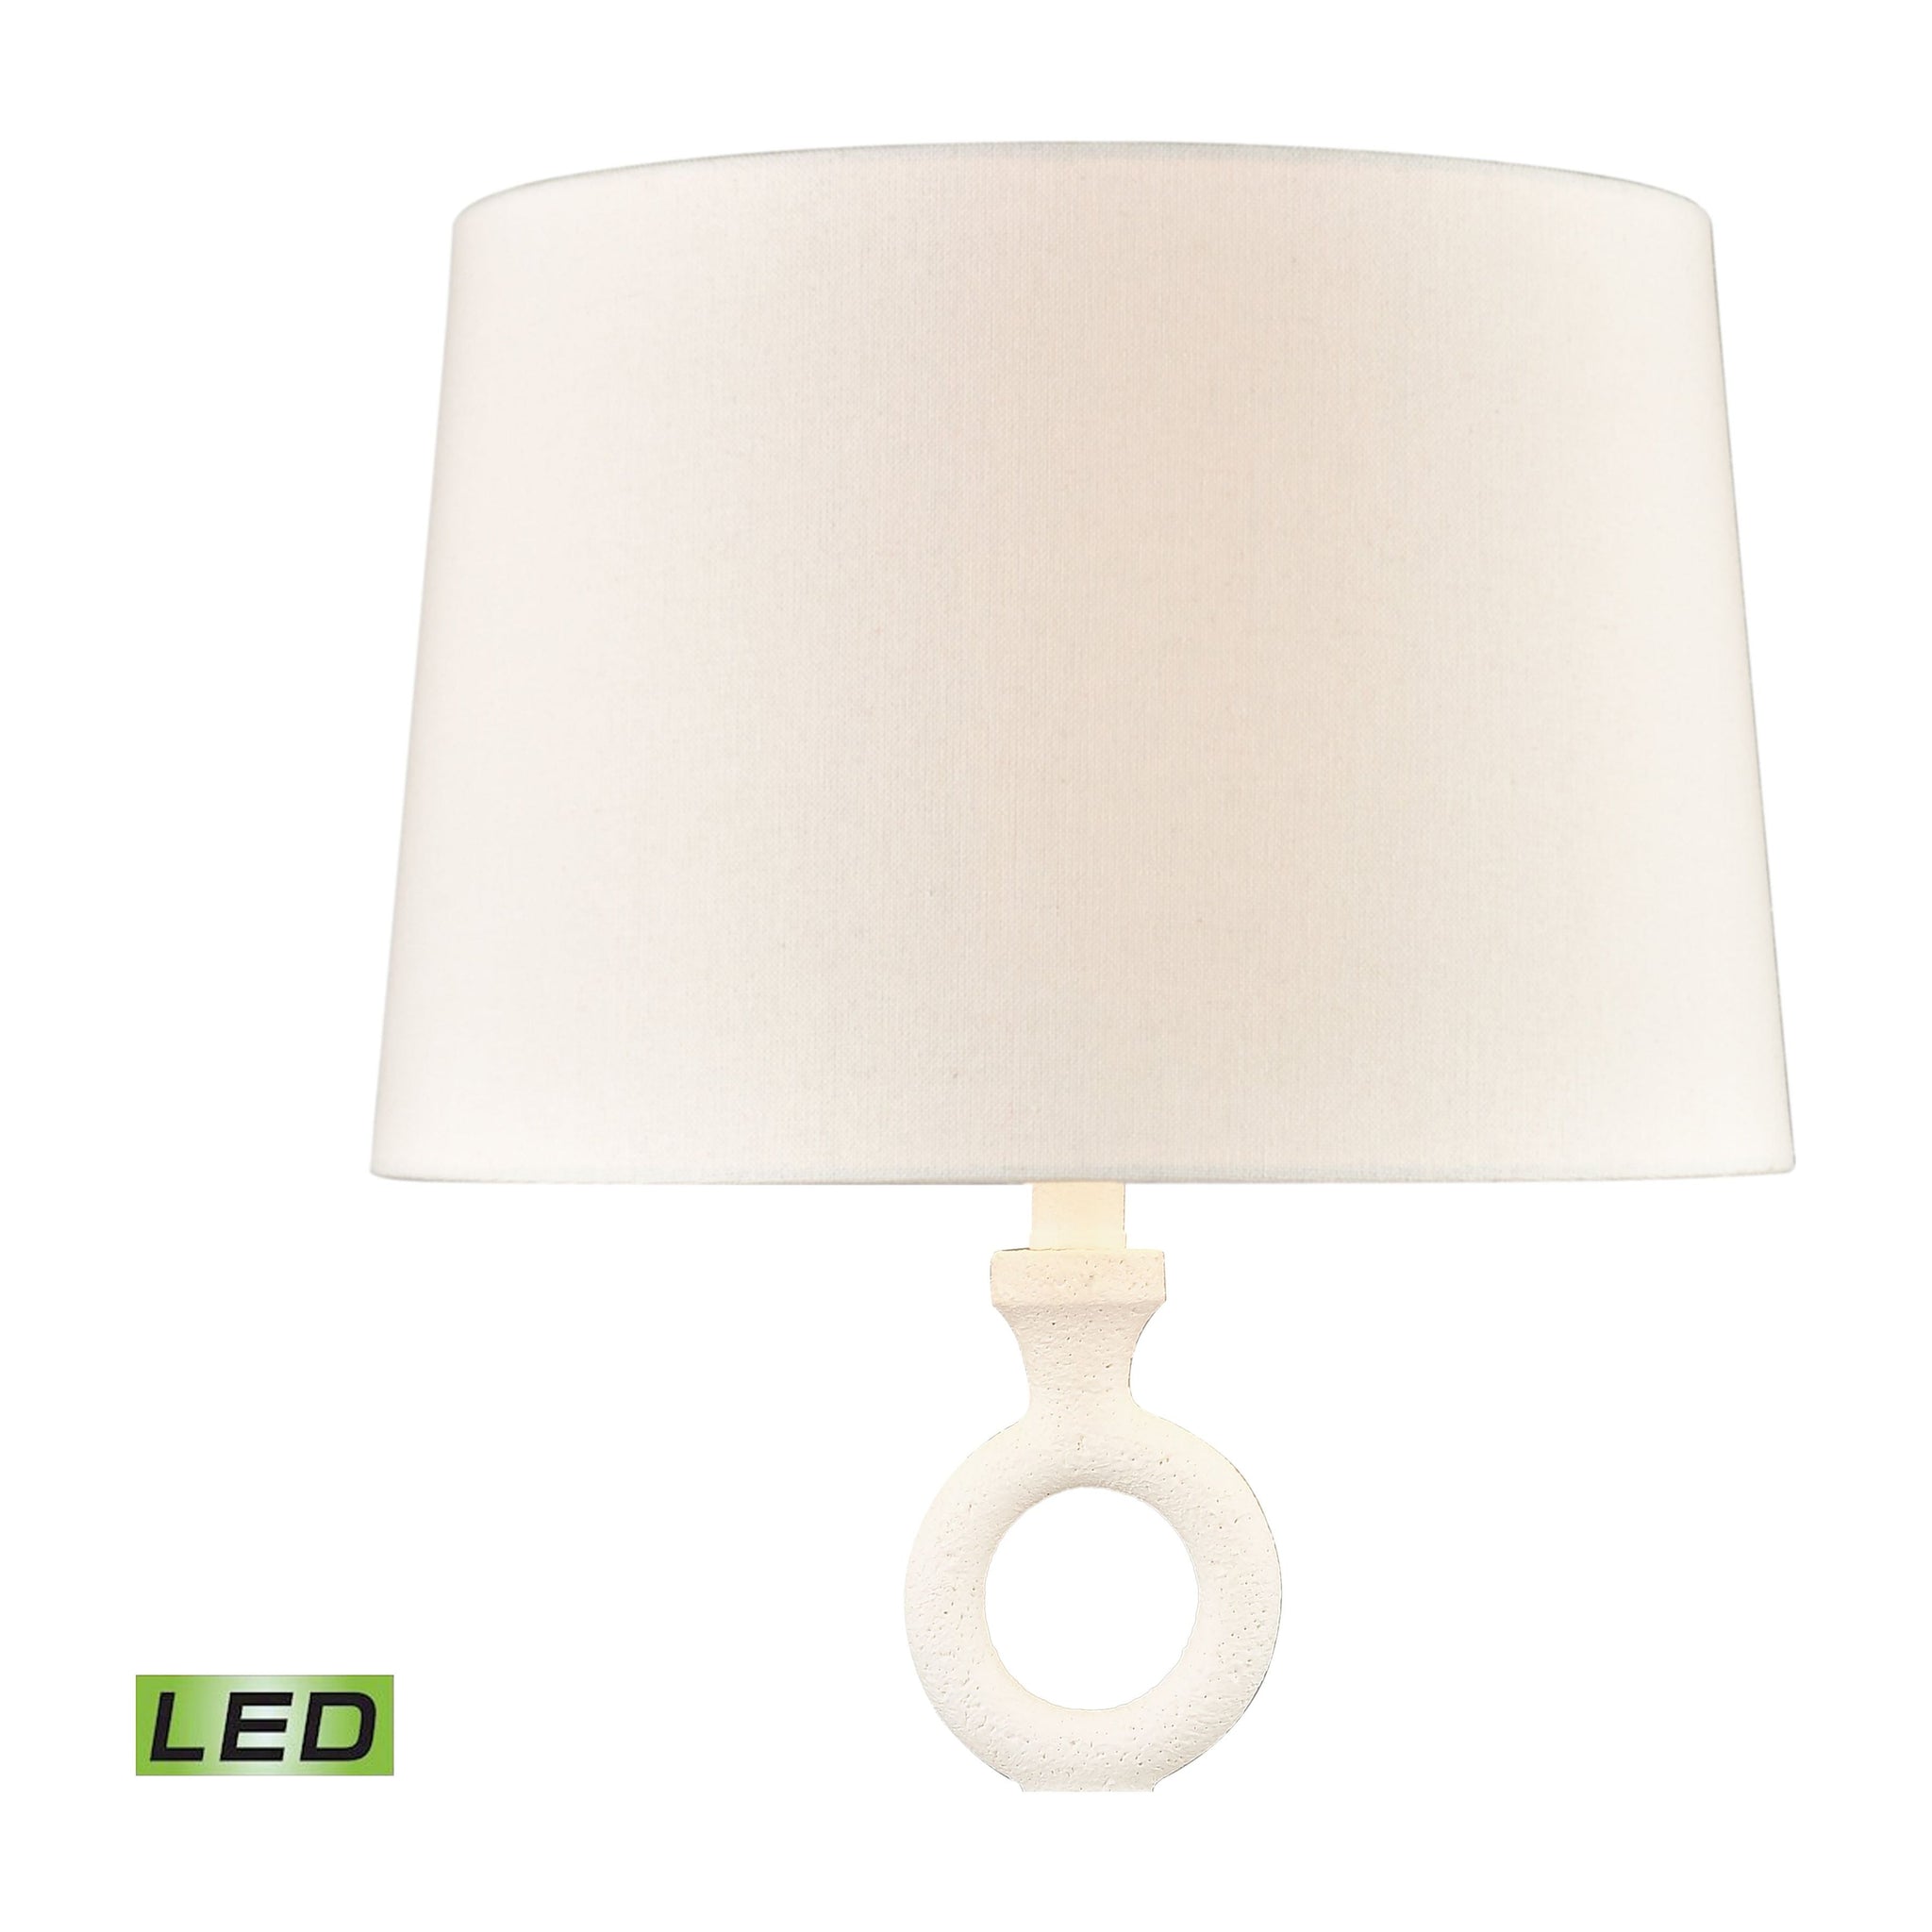 Hammered Home 33" High 1-Light Table Lamp